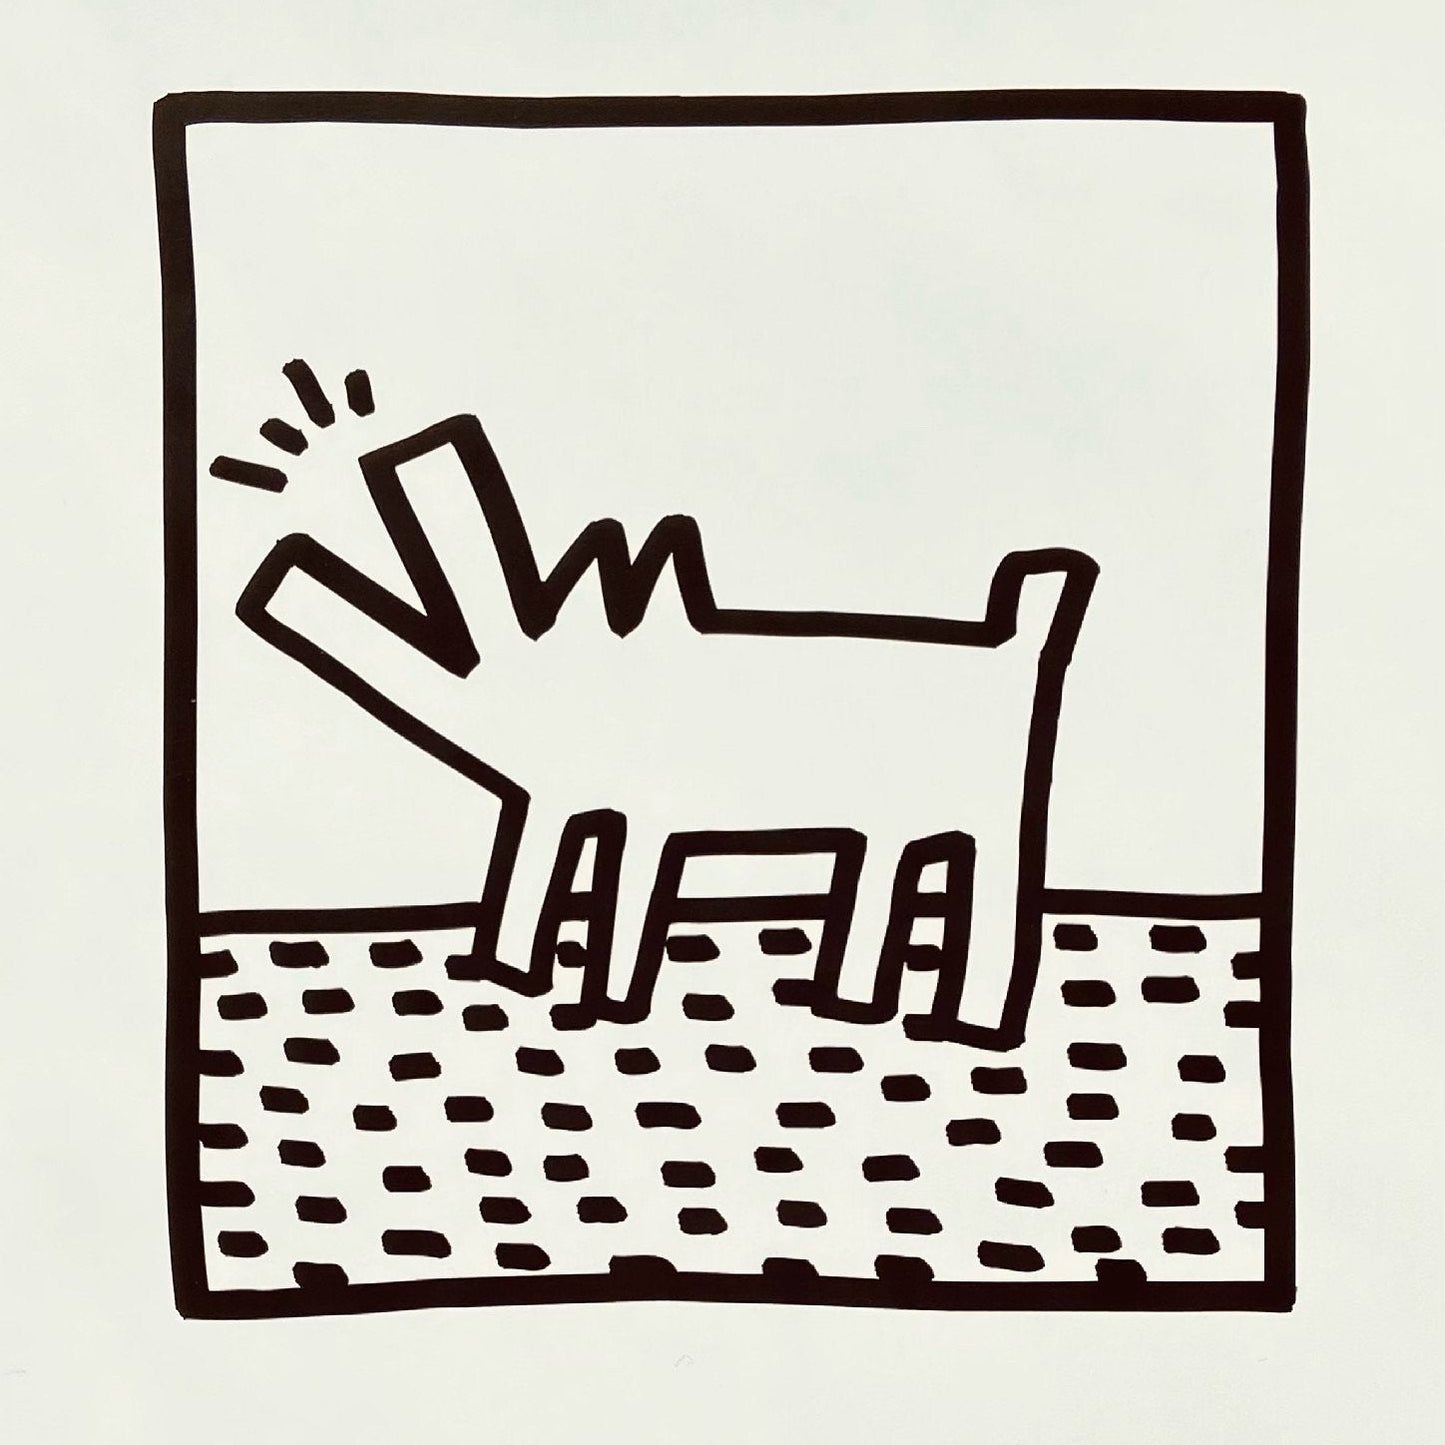 Untitled (Barking dog) (1980s) | Keith Haring pop art print  The Trumpet Shop   